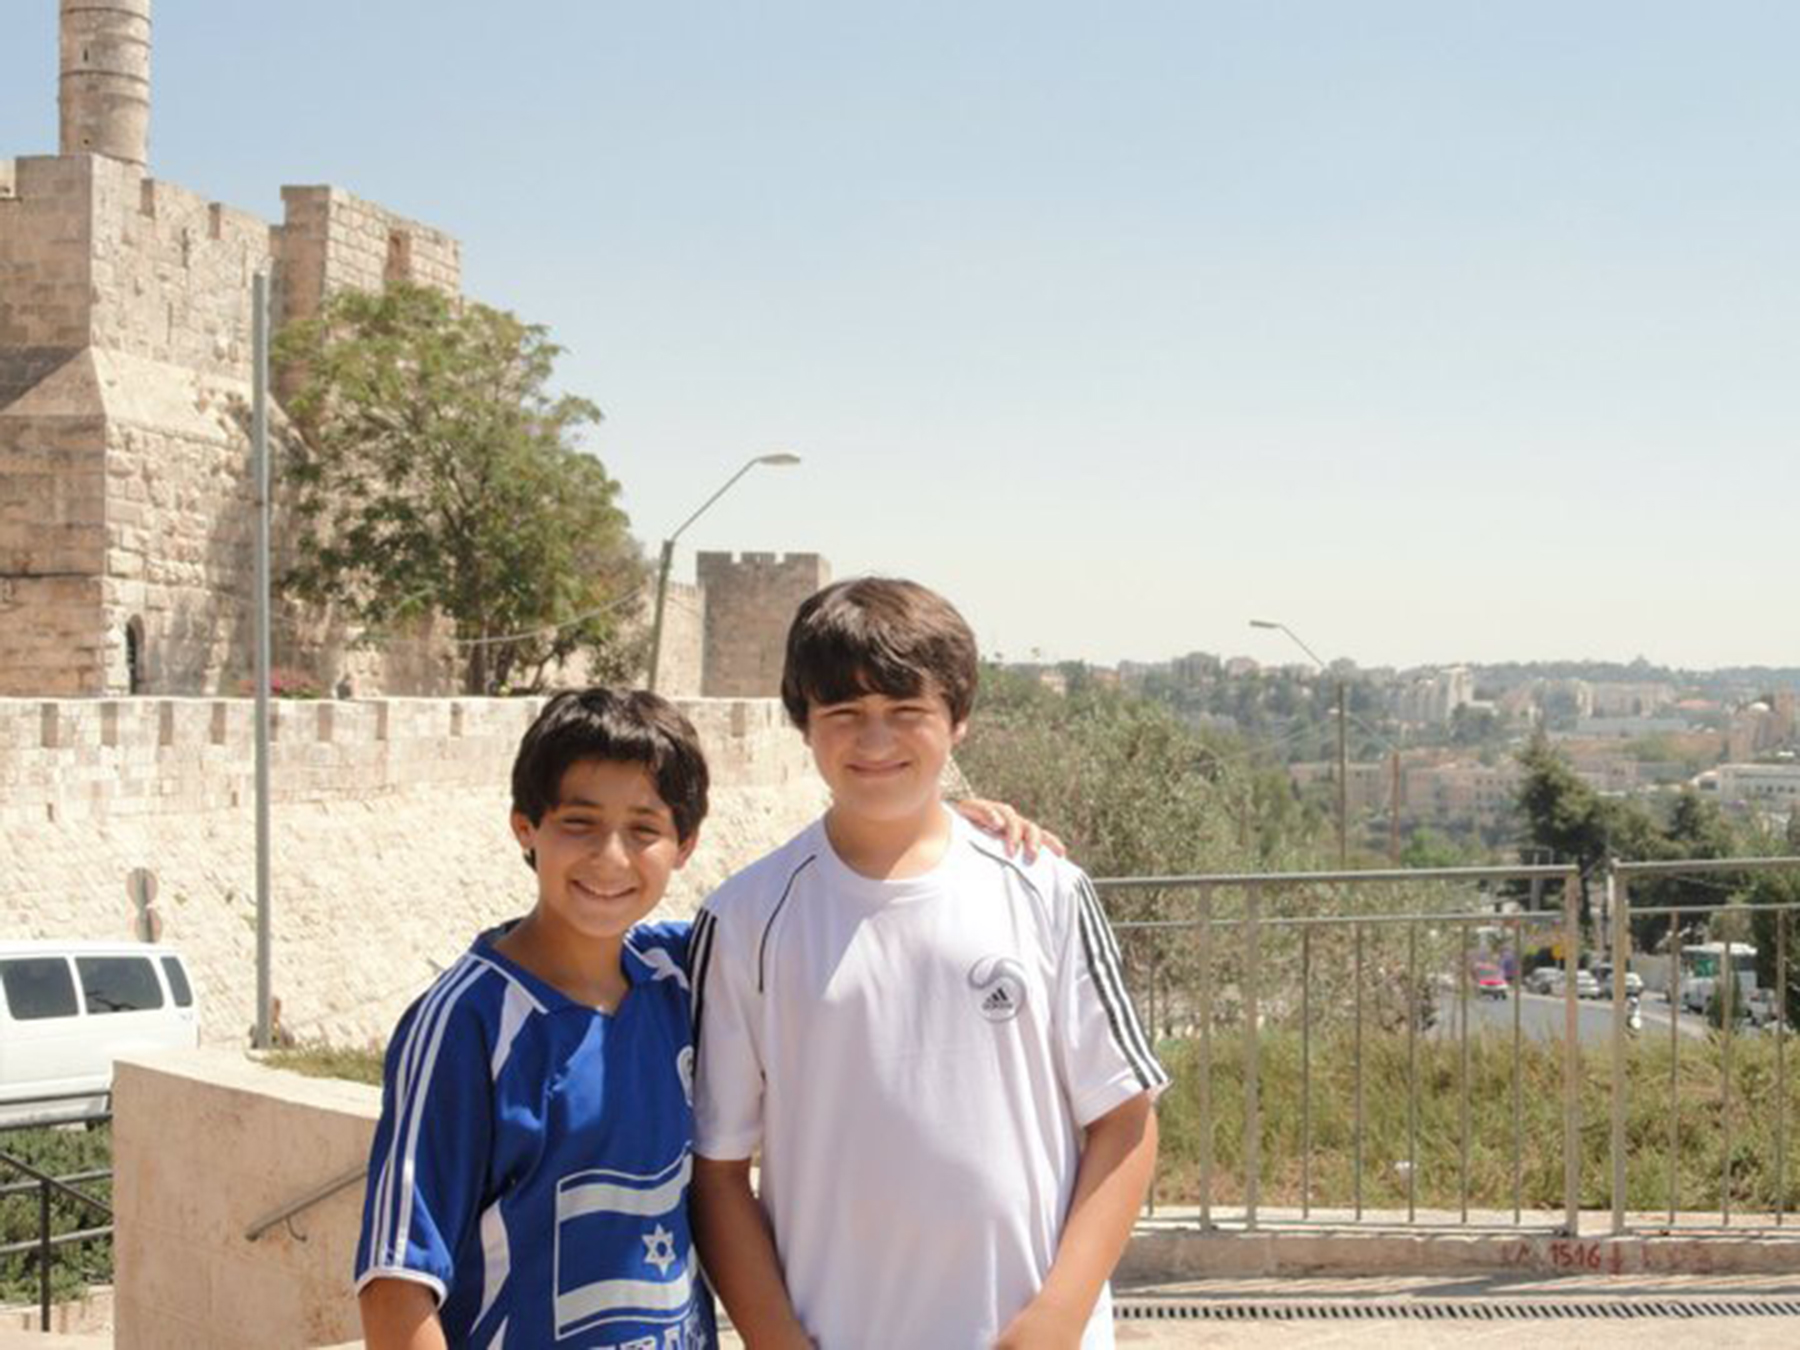 aaron and friend summer in israel